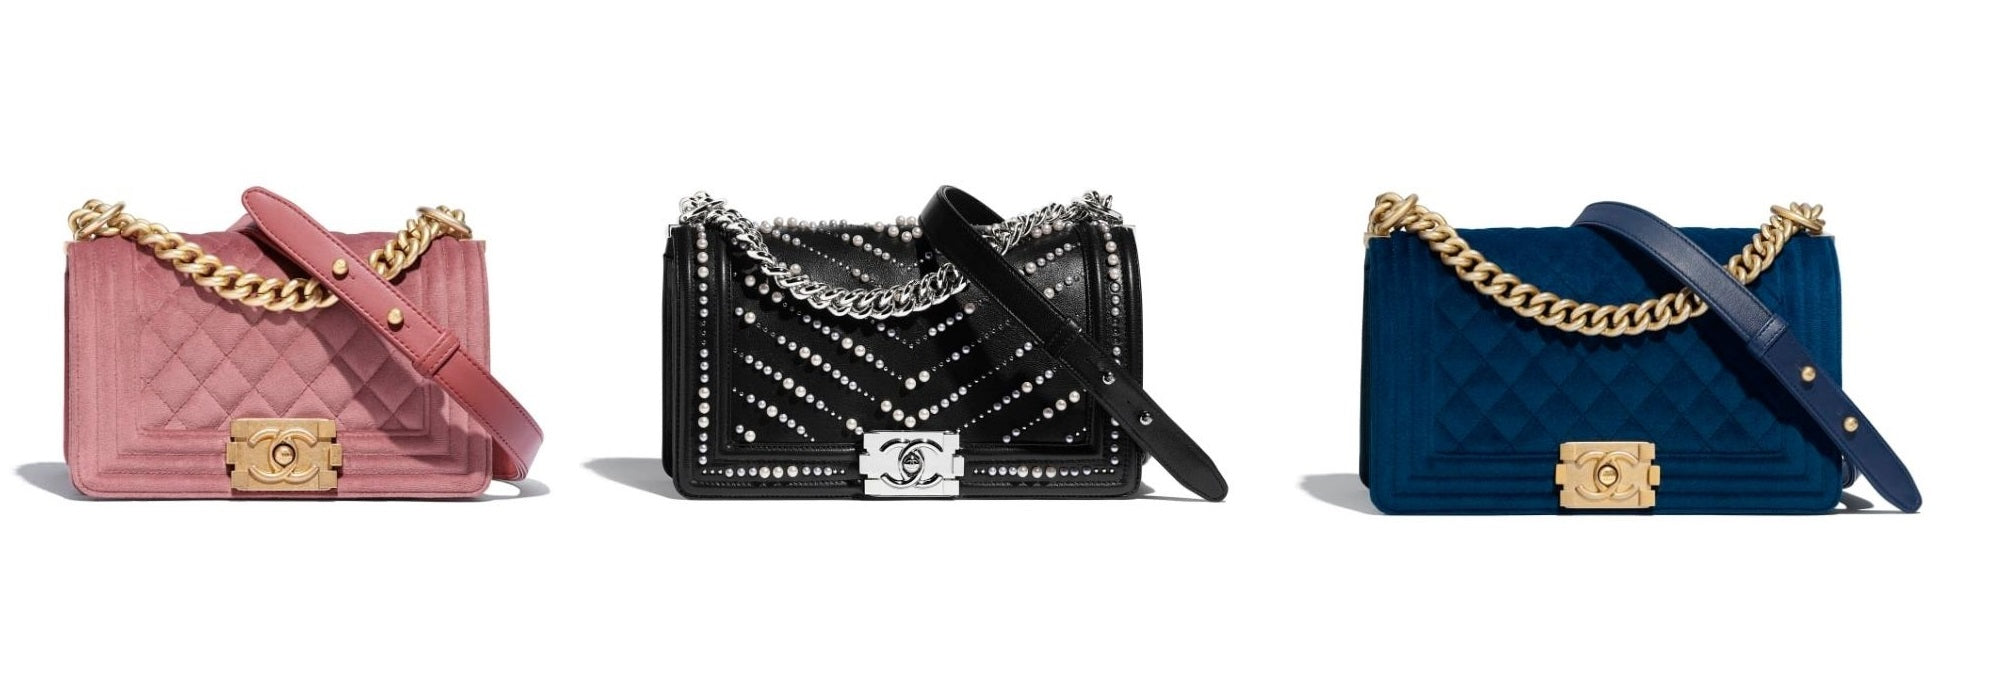 Chanel Fall/Winter 2021 Bag Collection: Styles and Prices chanel boy